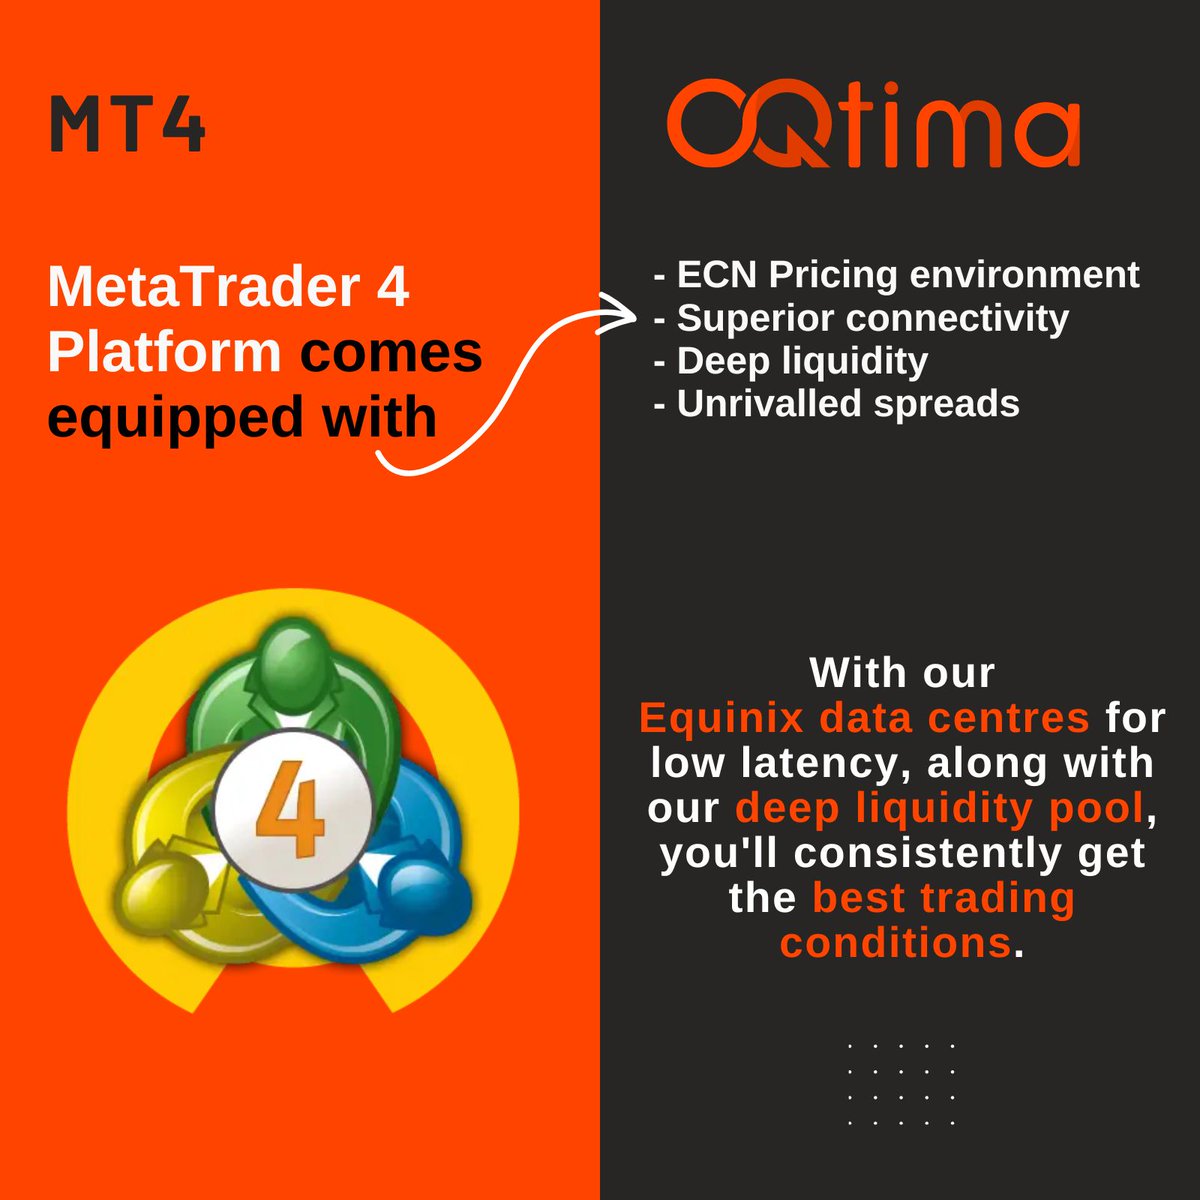 Maximize your MT4 trading potential with OQtima! Experience unparalleled ECN pricing, superior connectivity, deep liquidity, and unrivaled spreads. Ready for an upgrade? Visit 👉 oq-tima.com/ContactLIB 👈 #ForexTrading #MT4 #LowLatency #DeepLiquidity #TradeSmarter